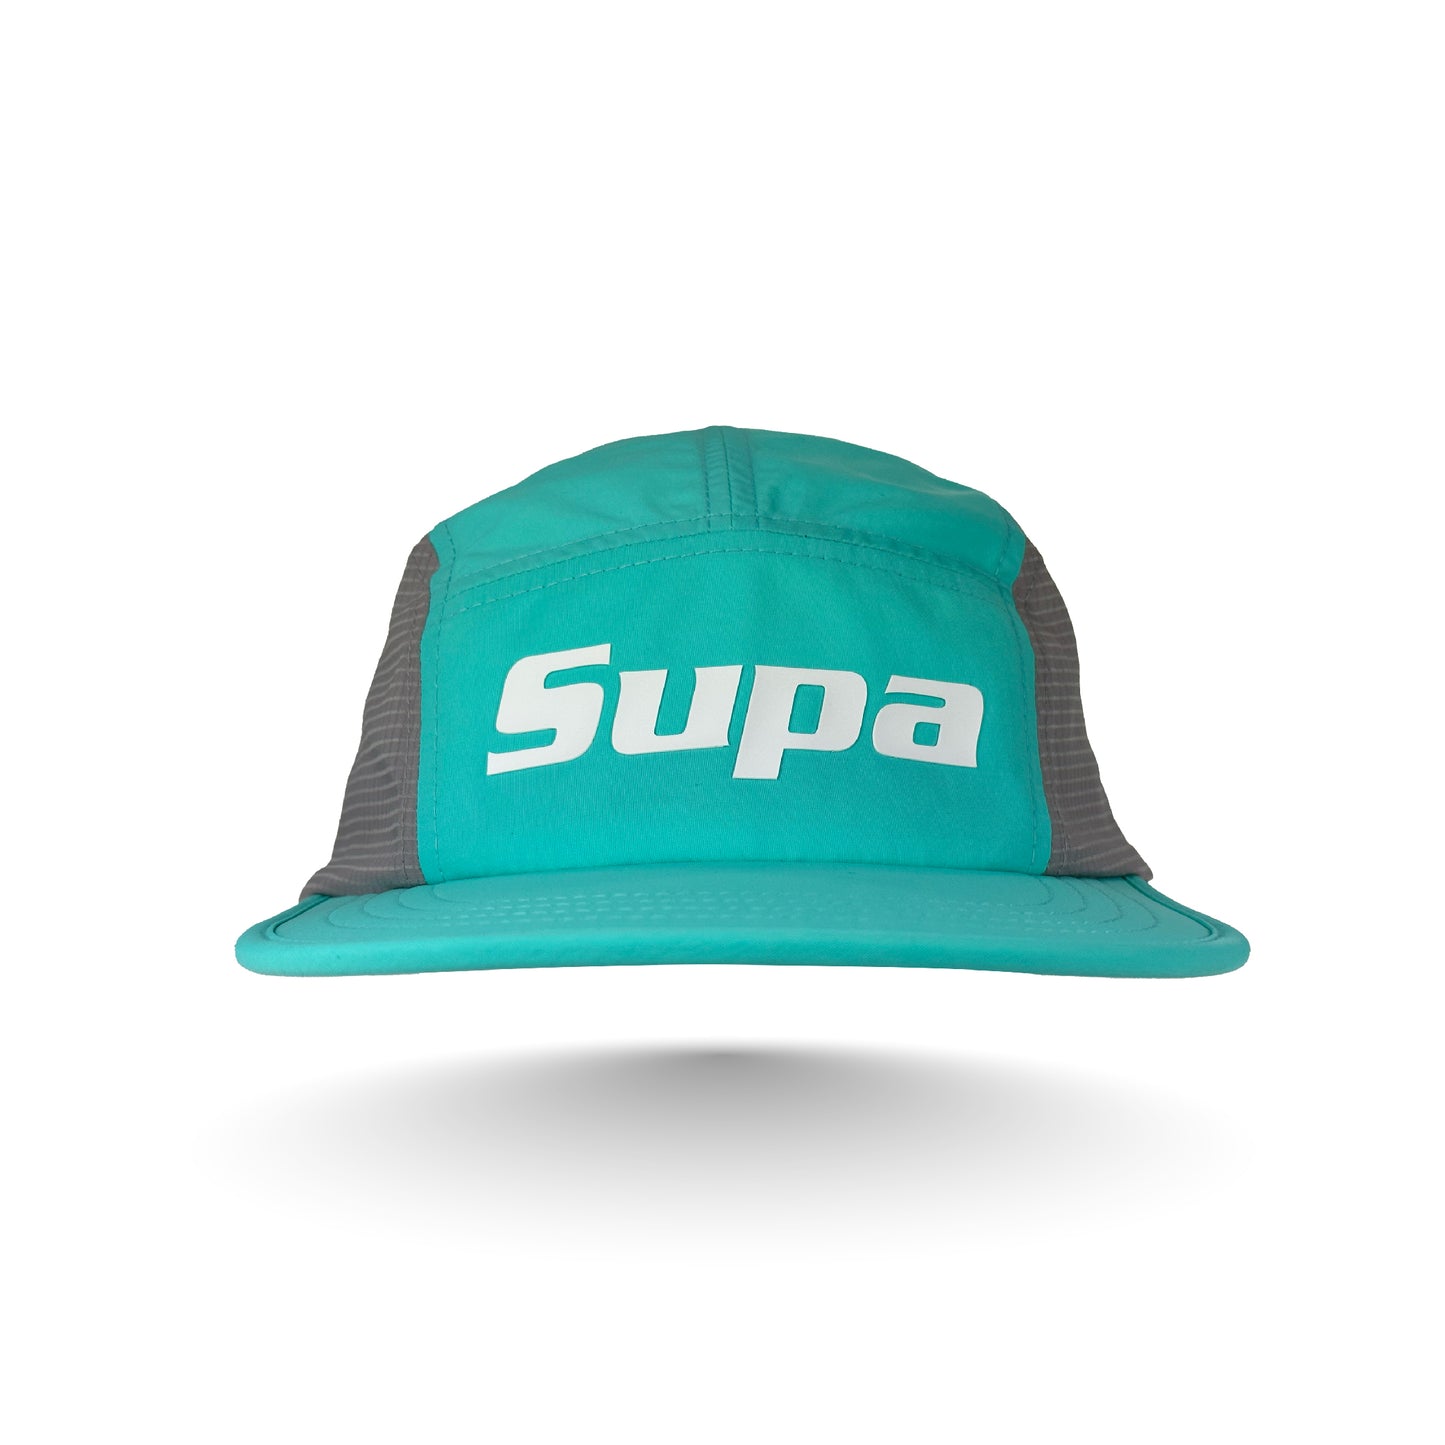 SUPA FLY - Turquoise